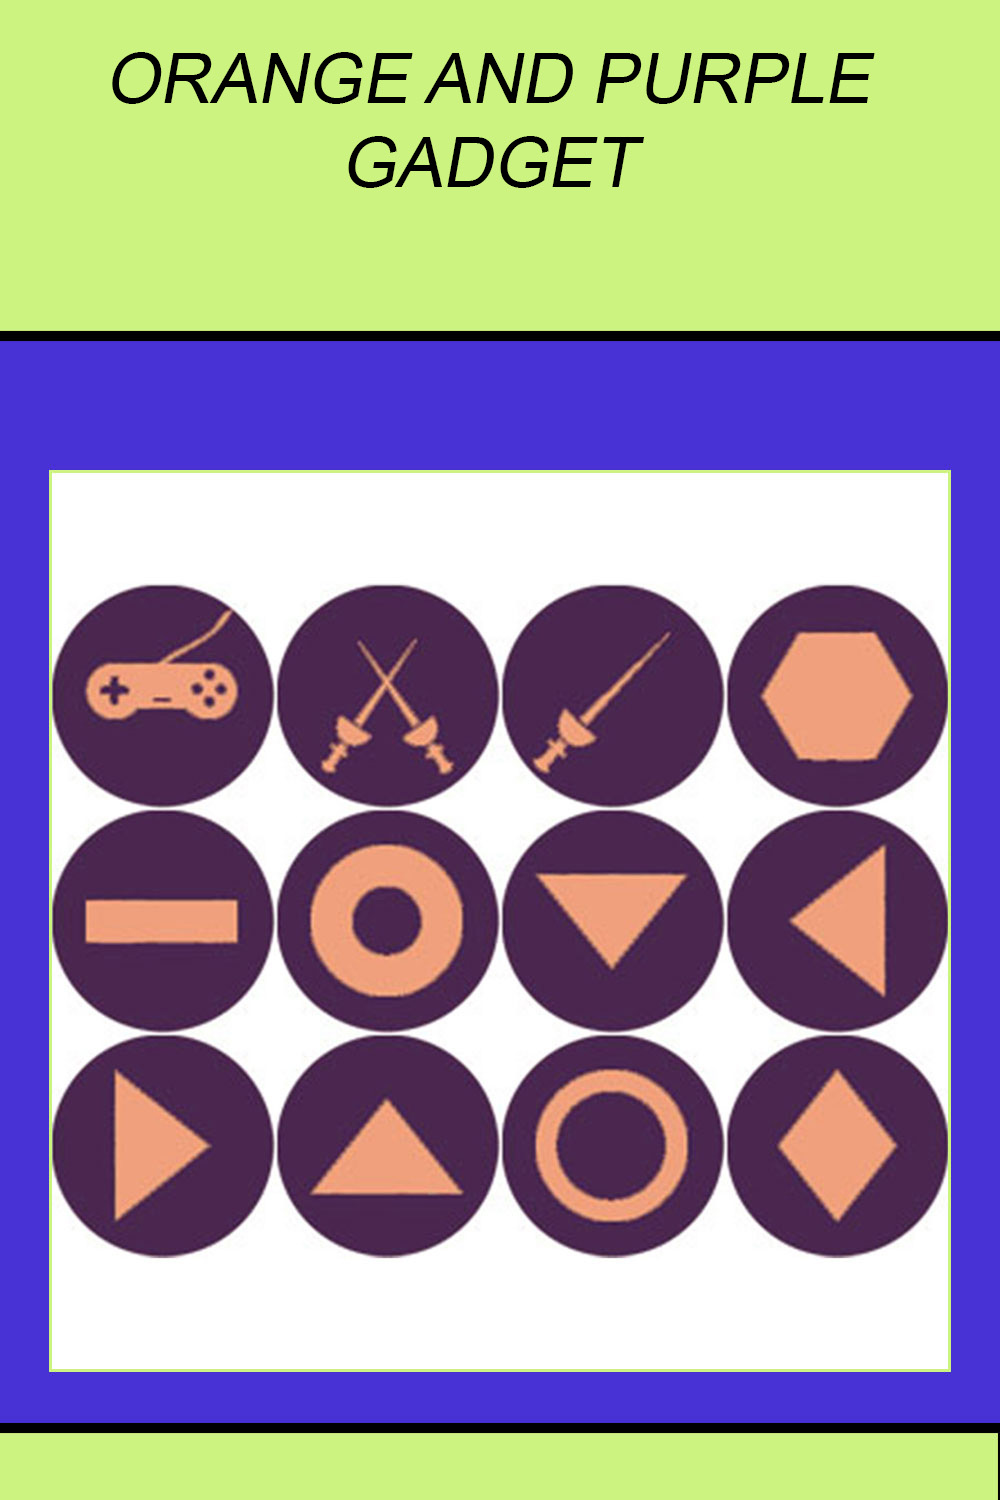 ORANGE AND PURPLE GADGET ROUND ICONS pinterest preview image.